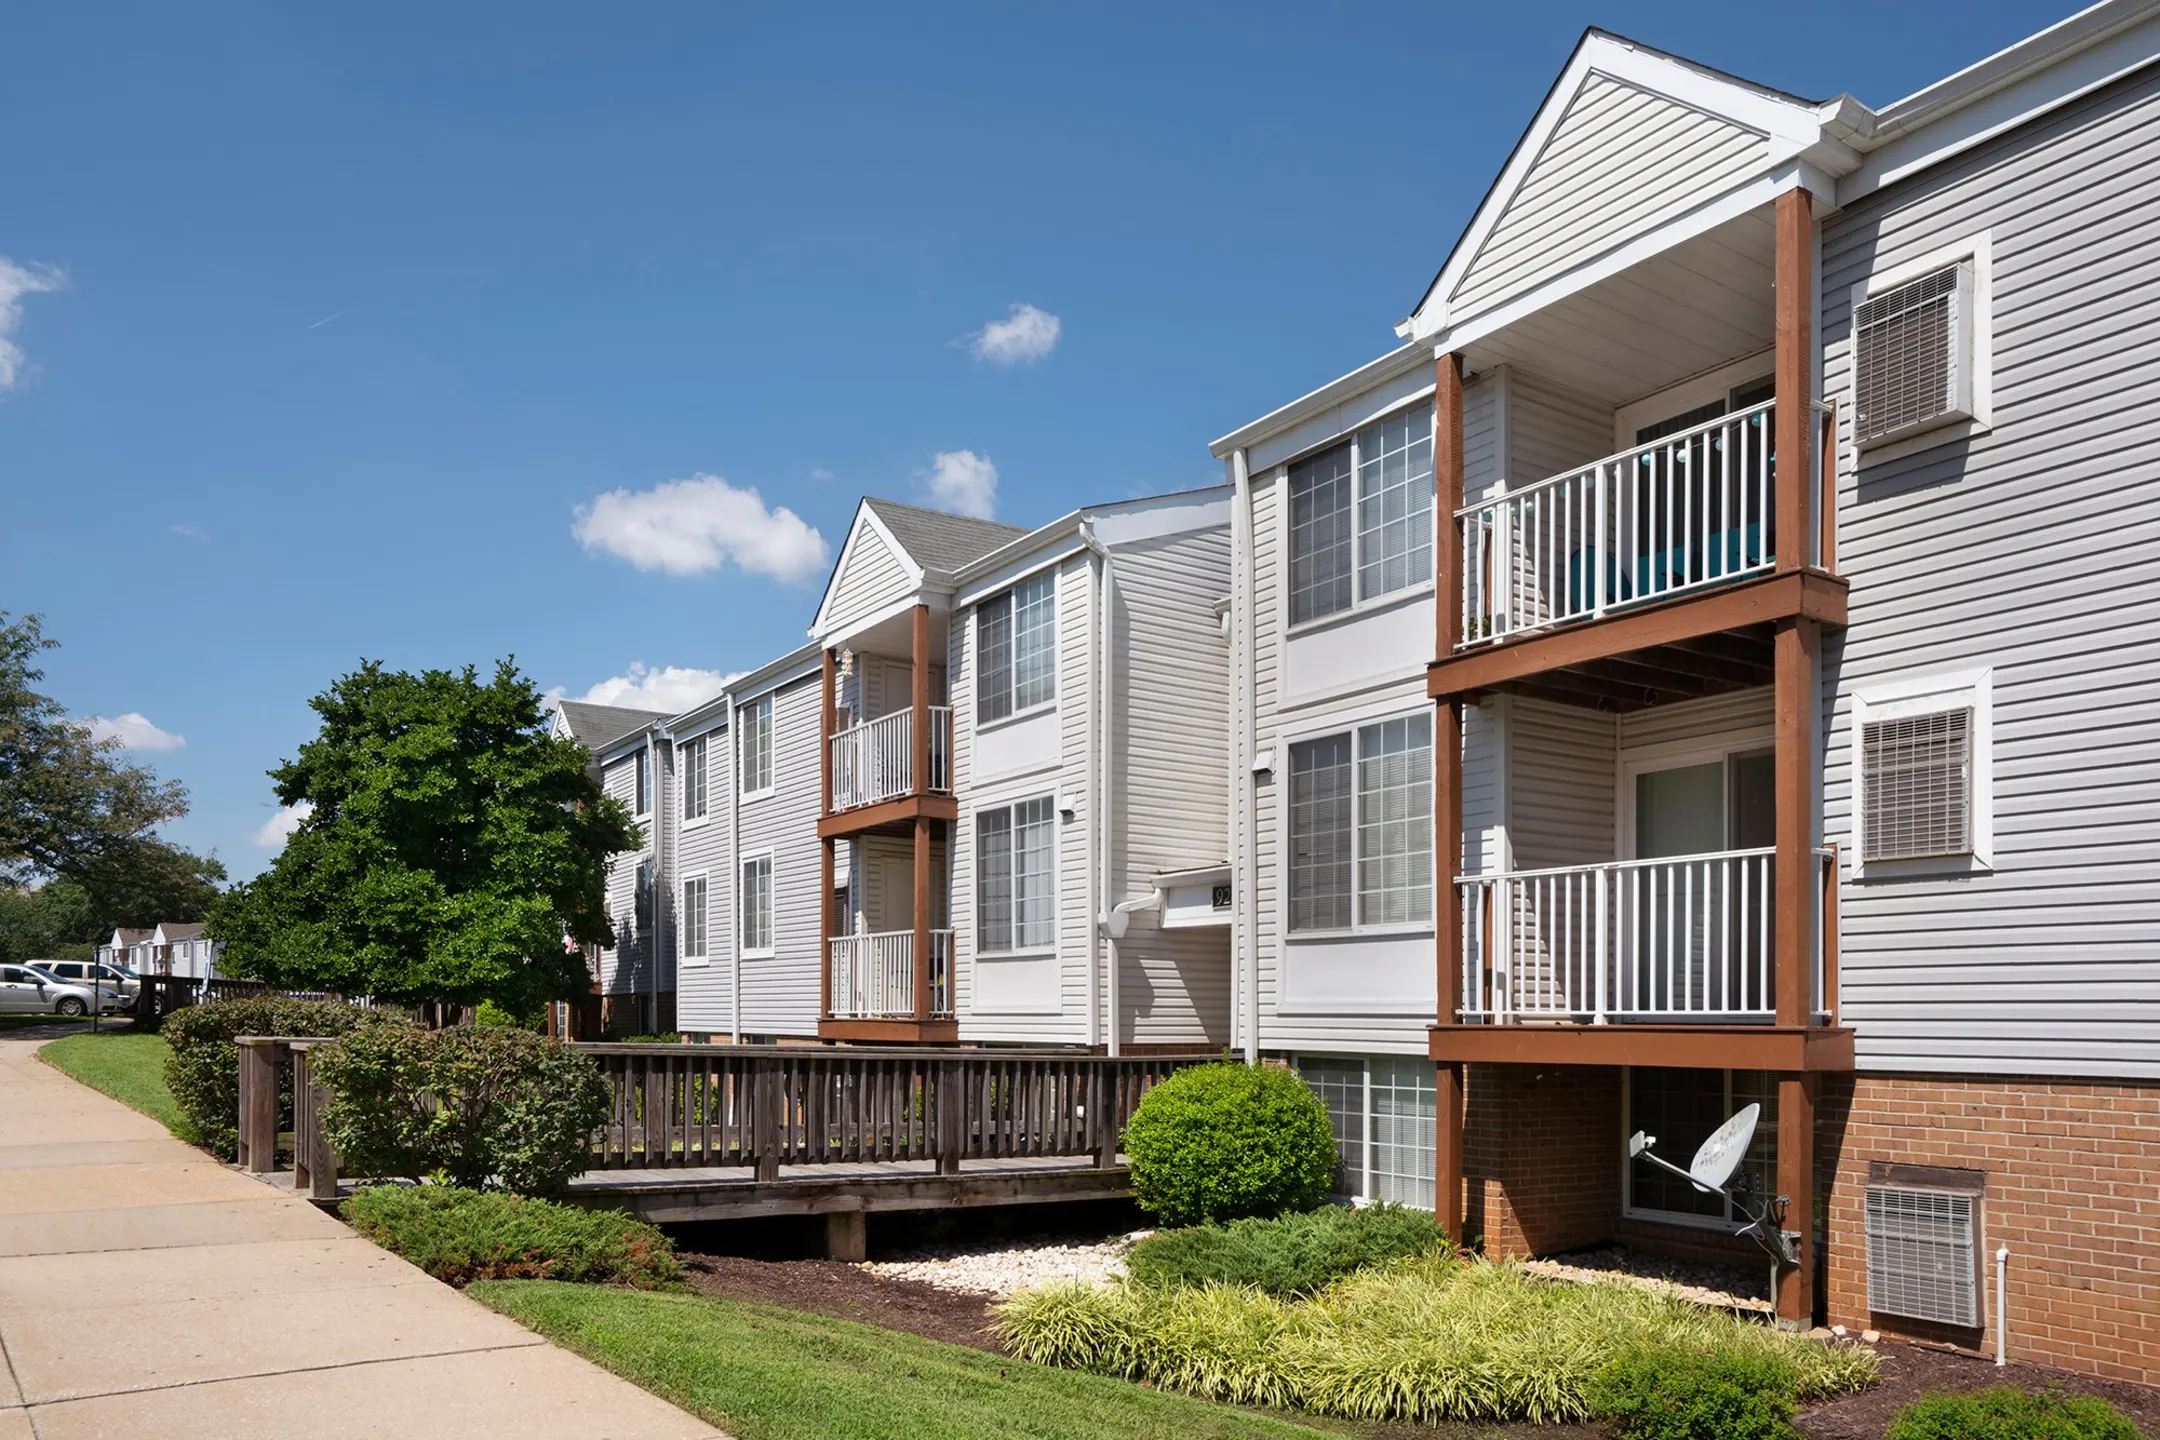 Building - The Apartments at Canterbury - Rosedale, MD